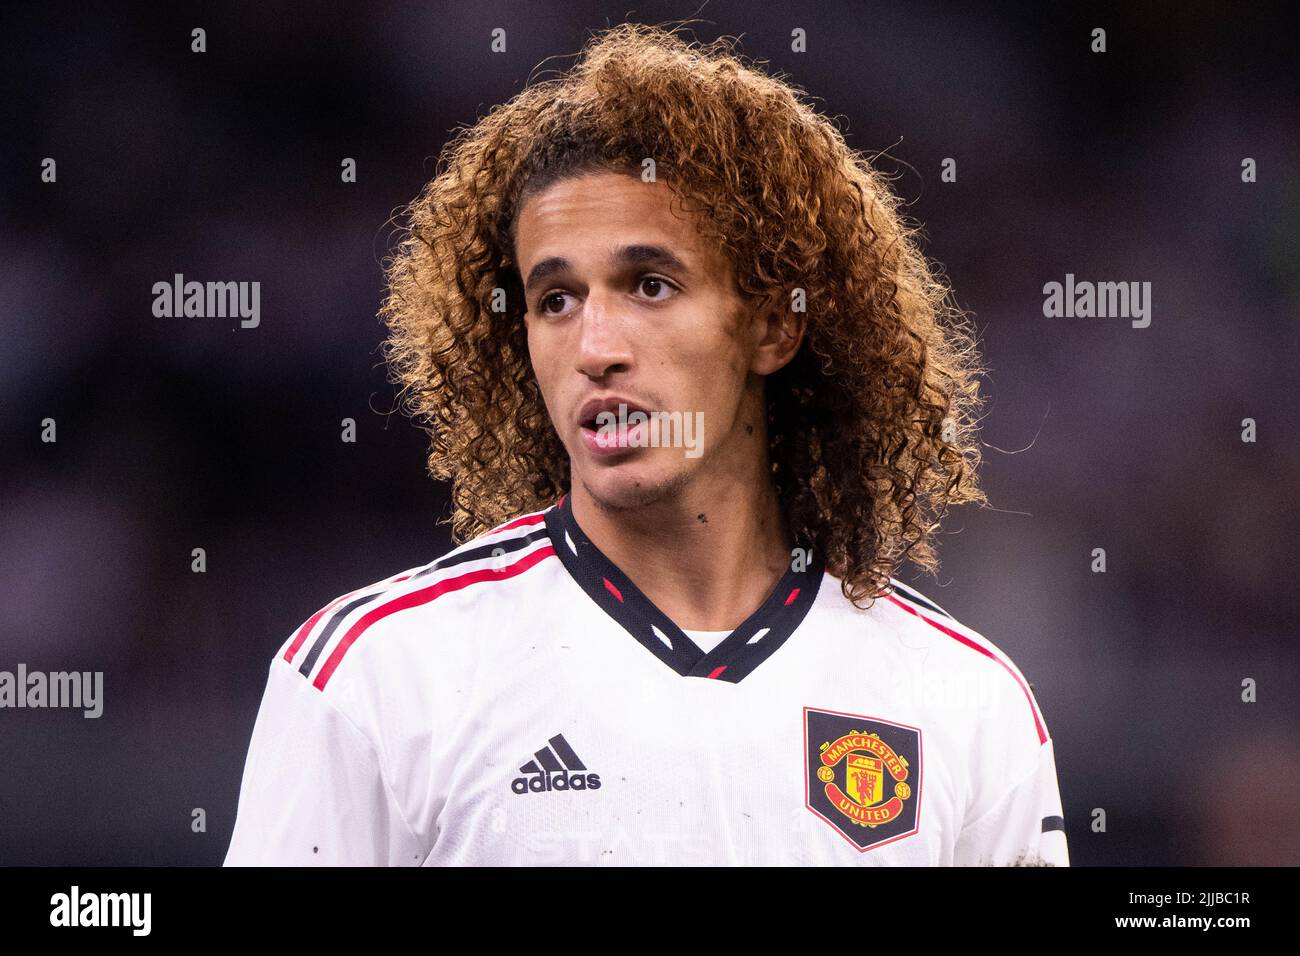 PERTH, AUSTRALIA - JULY 23: Hannibal Mejbri of Manchester United during the Pre-Season Friendly match between Manchester United and Aston Villa at Opt Stock Photo